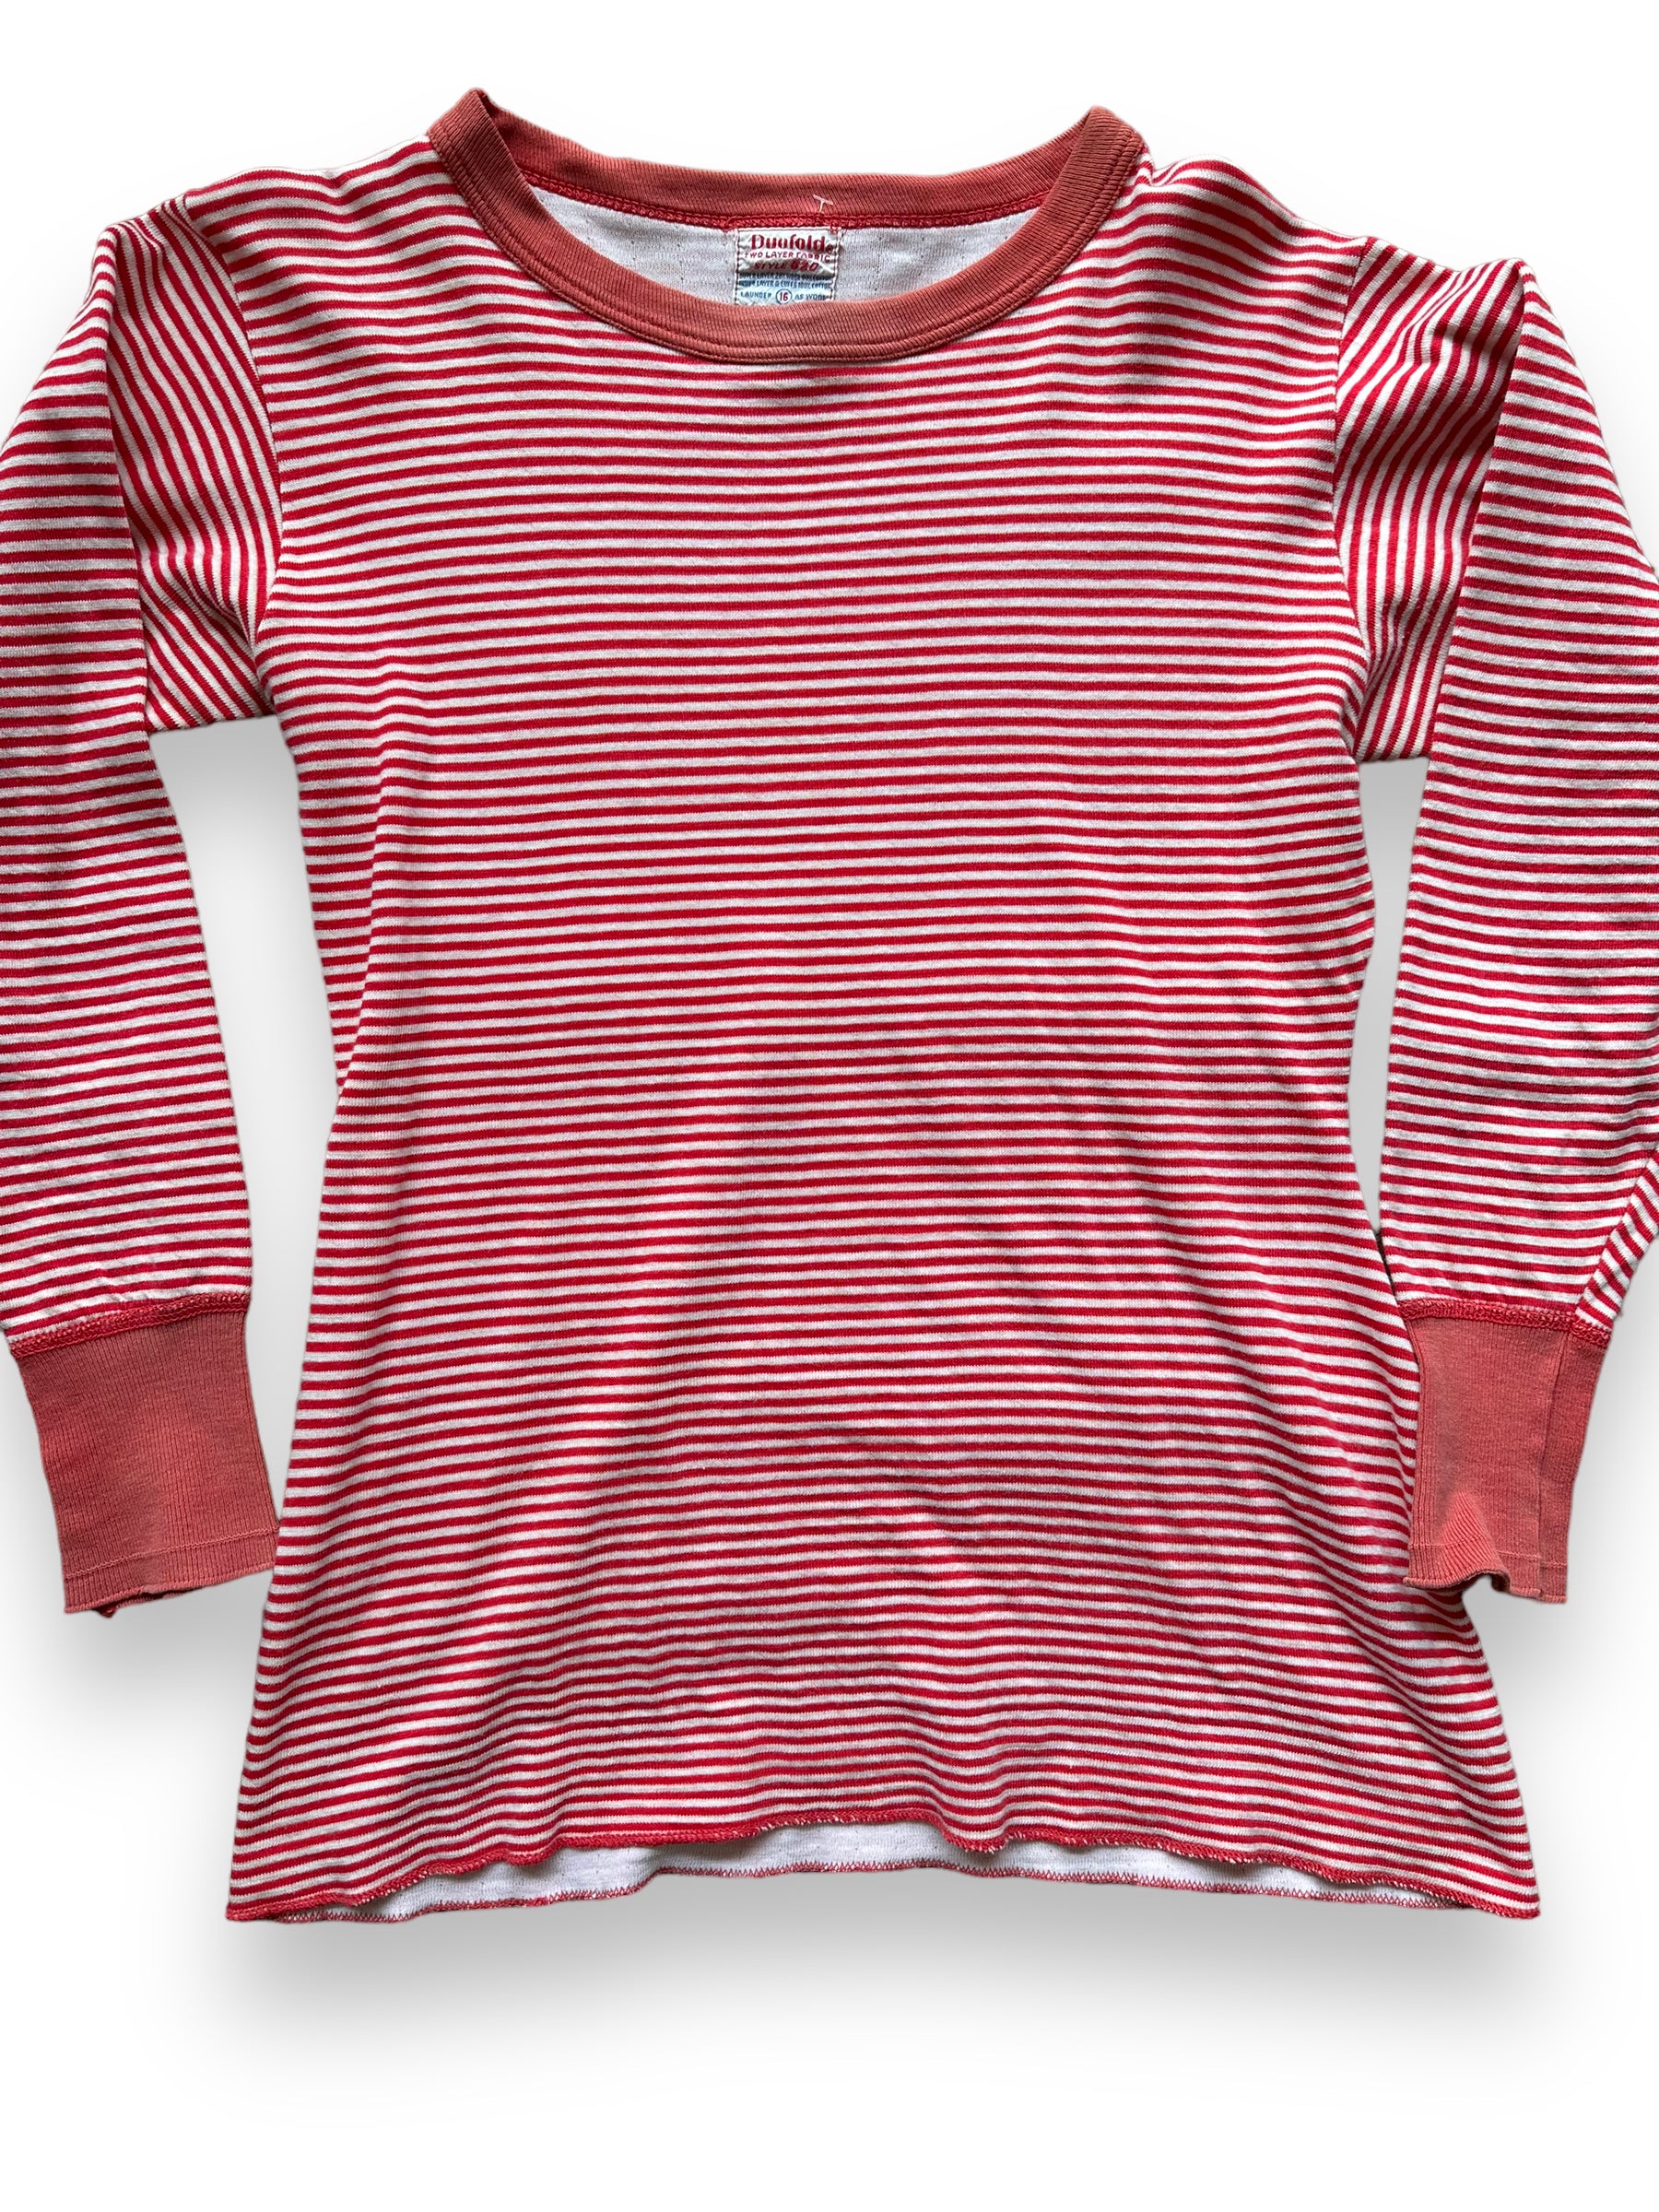 Front Detail on Vintage Duofold Striped Thermal Top SZ M | Vintage Thermal Underwear Seattle | Barn Owl Vintage Goods